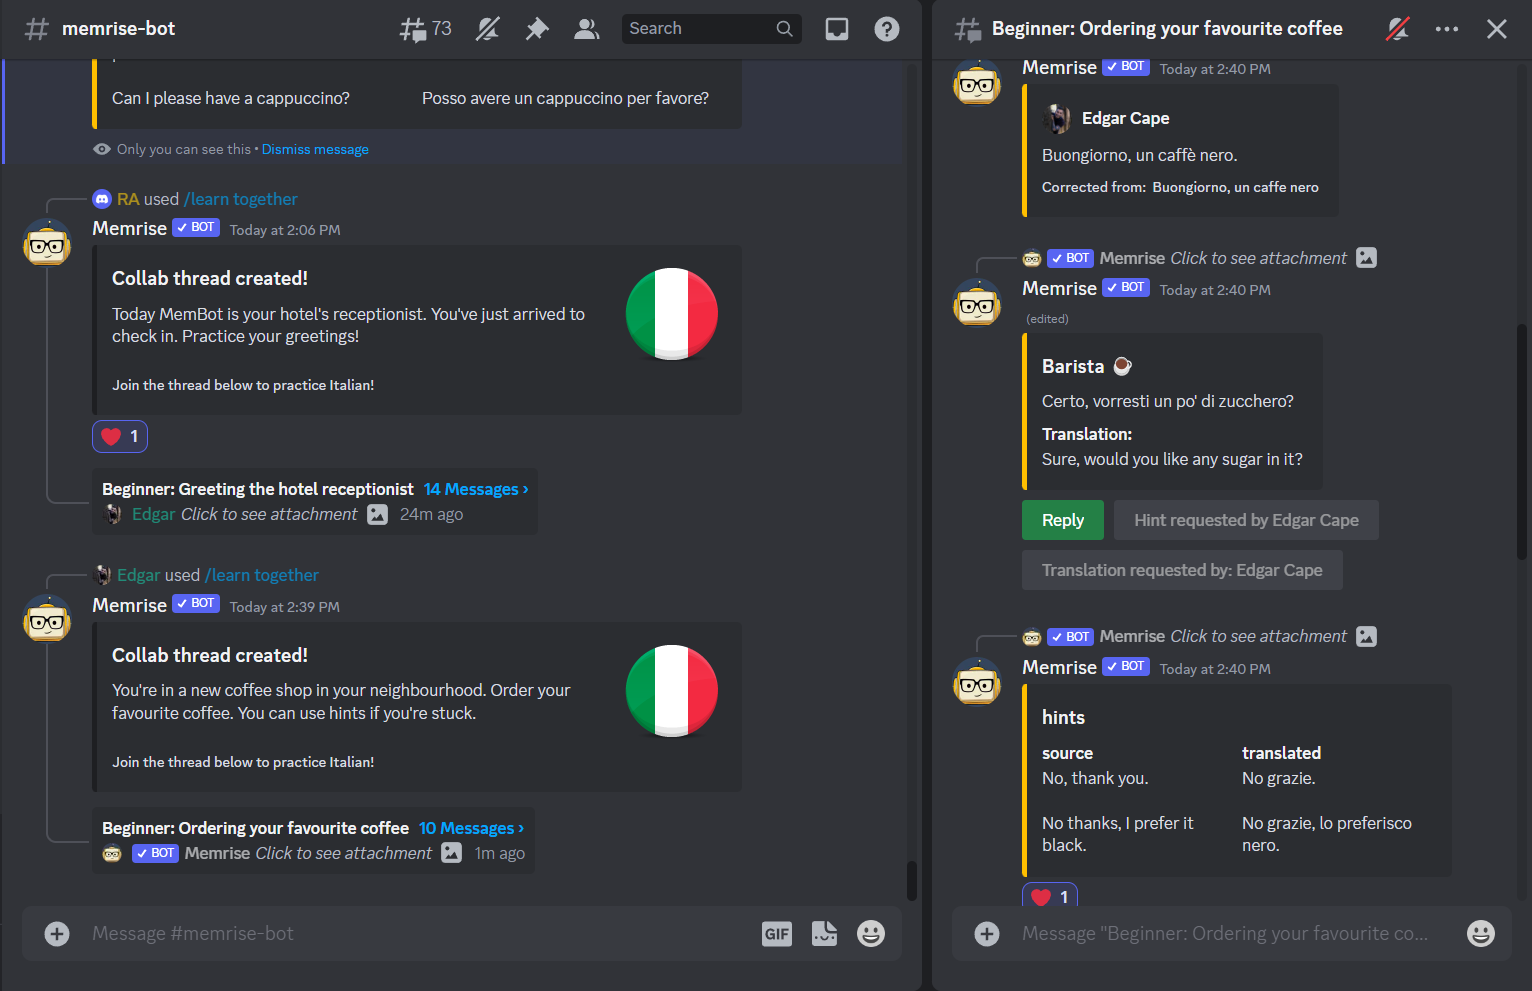 An in-server conversation using Memrise. The Memrise app is creating Threads inside a dedicated #memrise-bot chat channel. Each channel has a different role-playing scenario that lets members practice their new multilingual abilities.